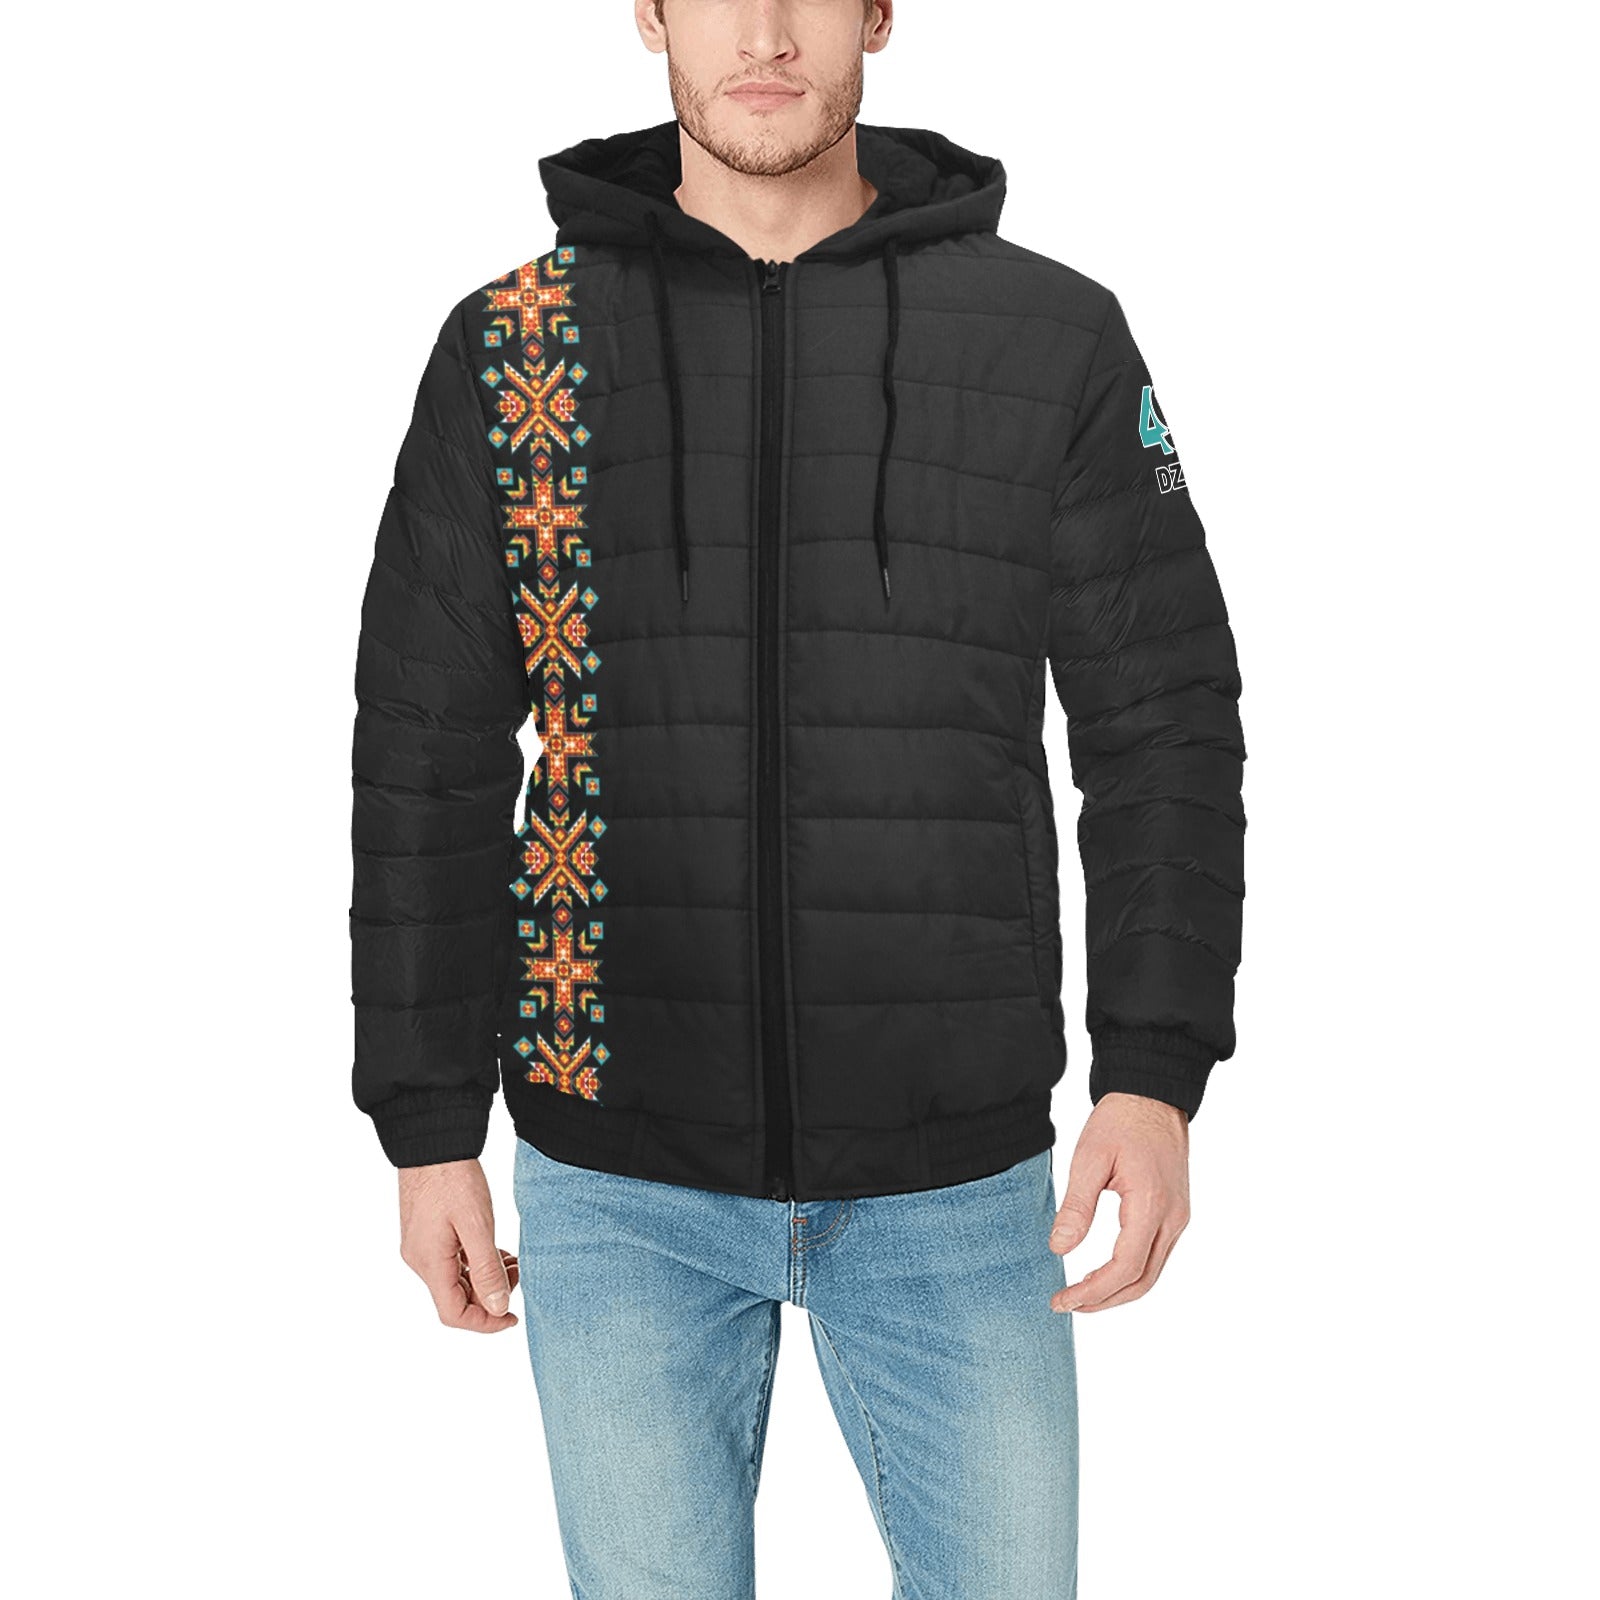 Teal Fire Men's Padded Hooded Jacket